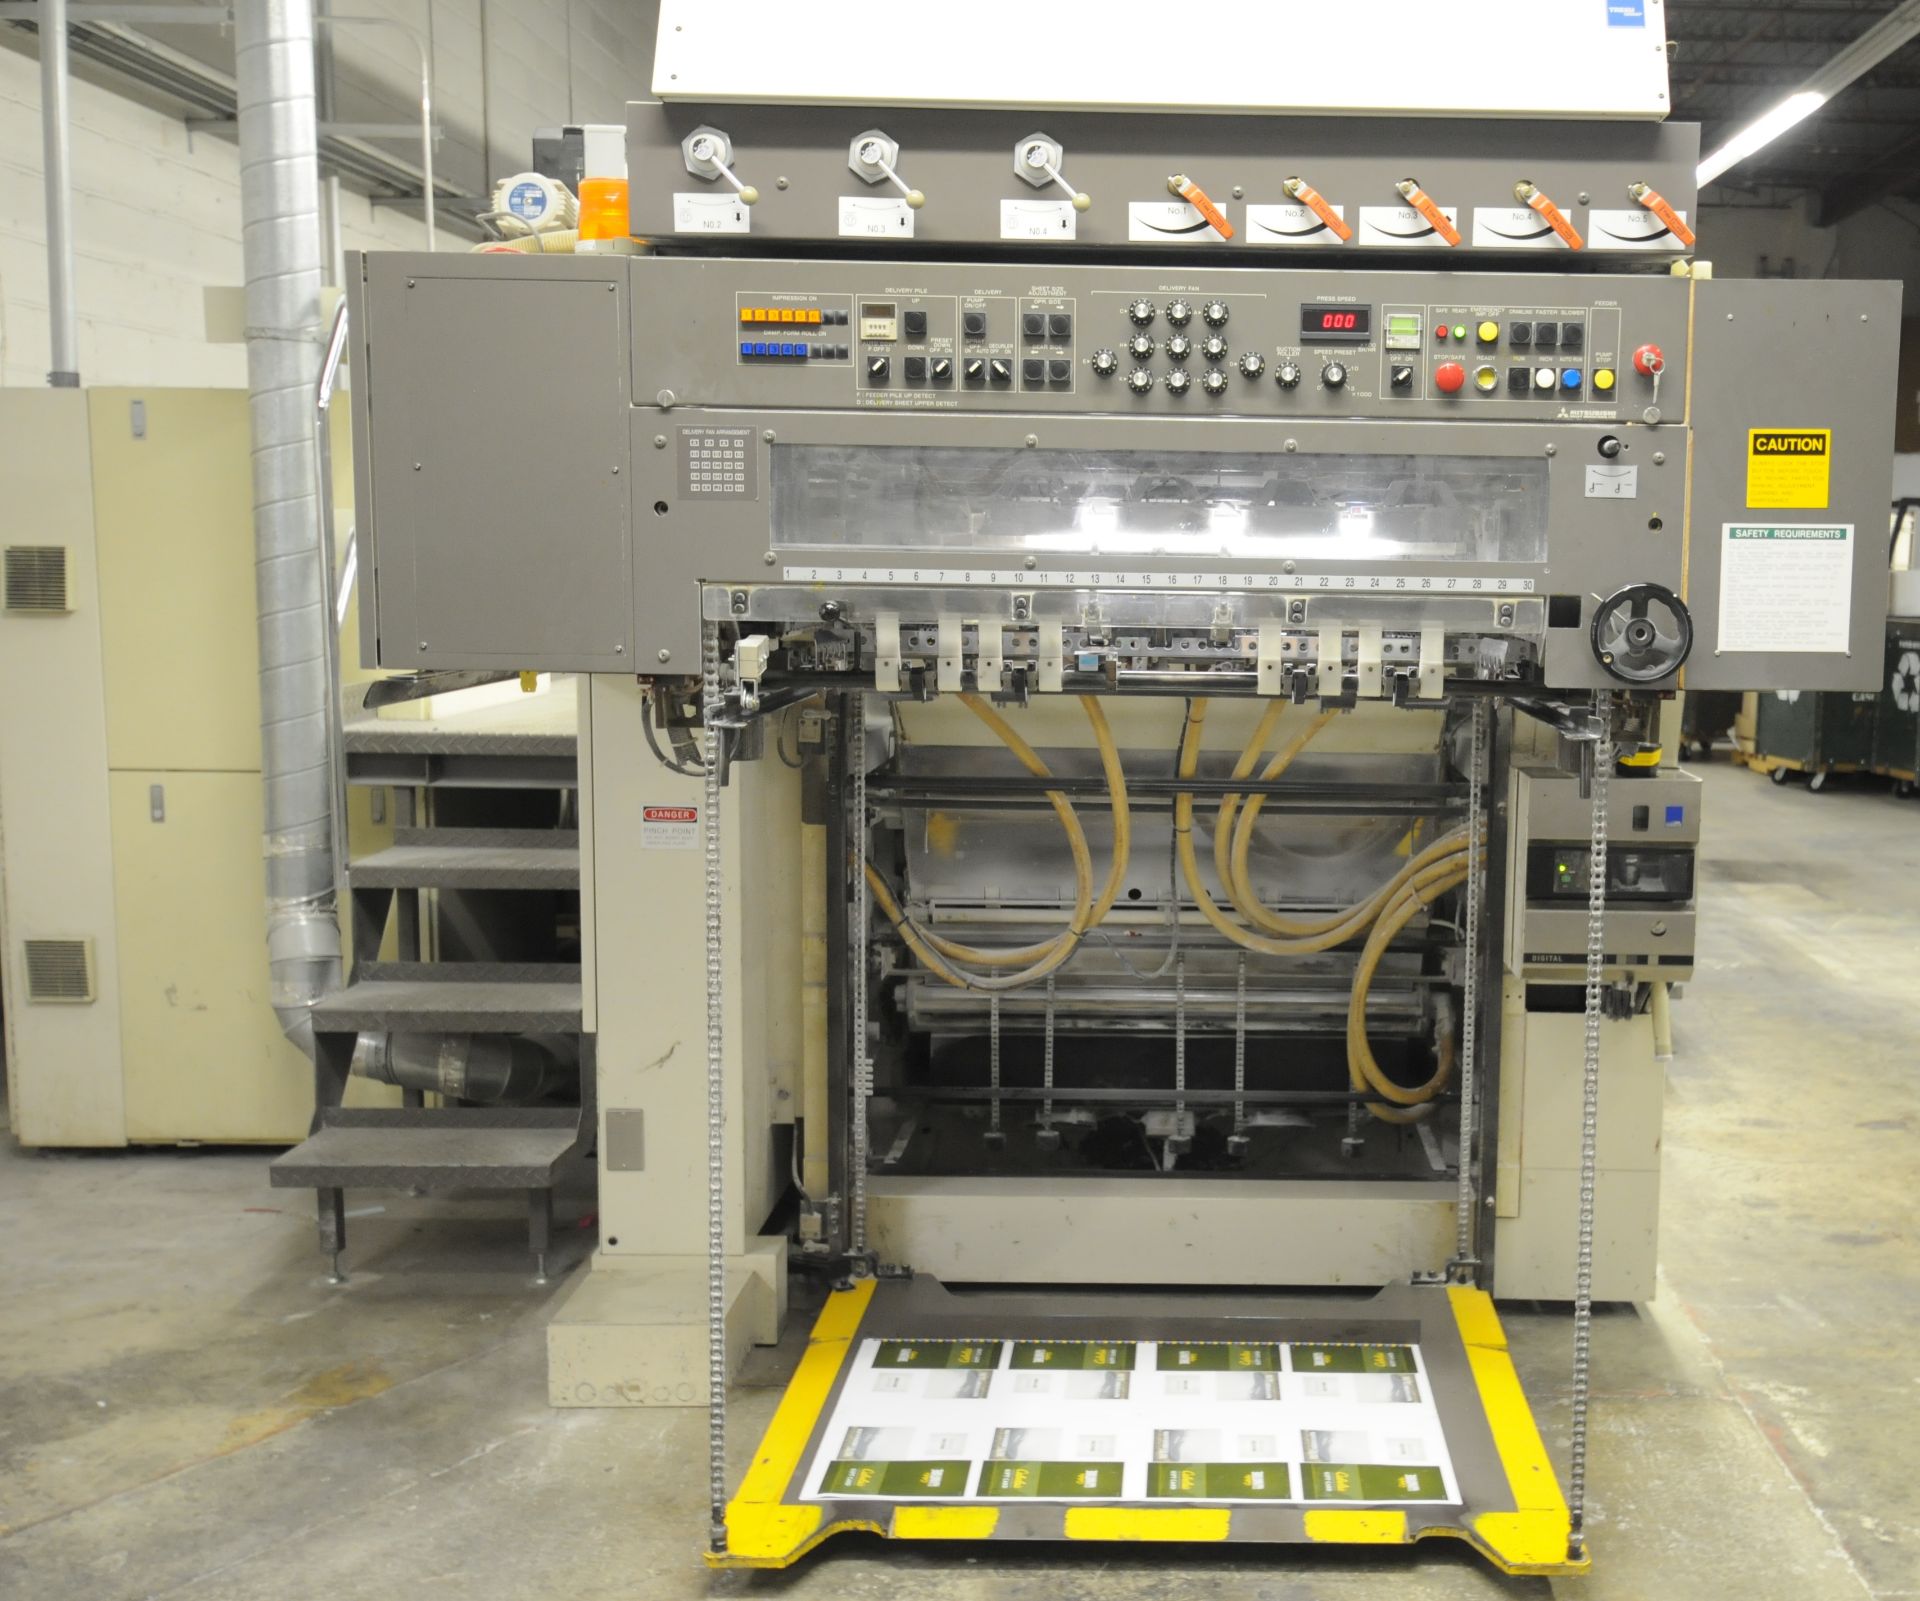 MITSUBISHI (2000) 3FR-5 (5) COLOR, 40"X28" SHEET-FEED OFFSET PERFECTOR PRESS WITH FULLY INTEGRATED - Image 5 of 13